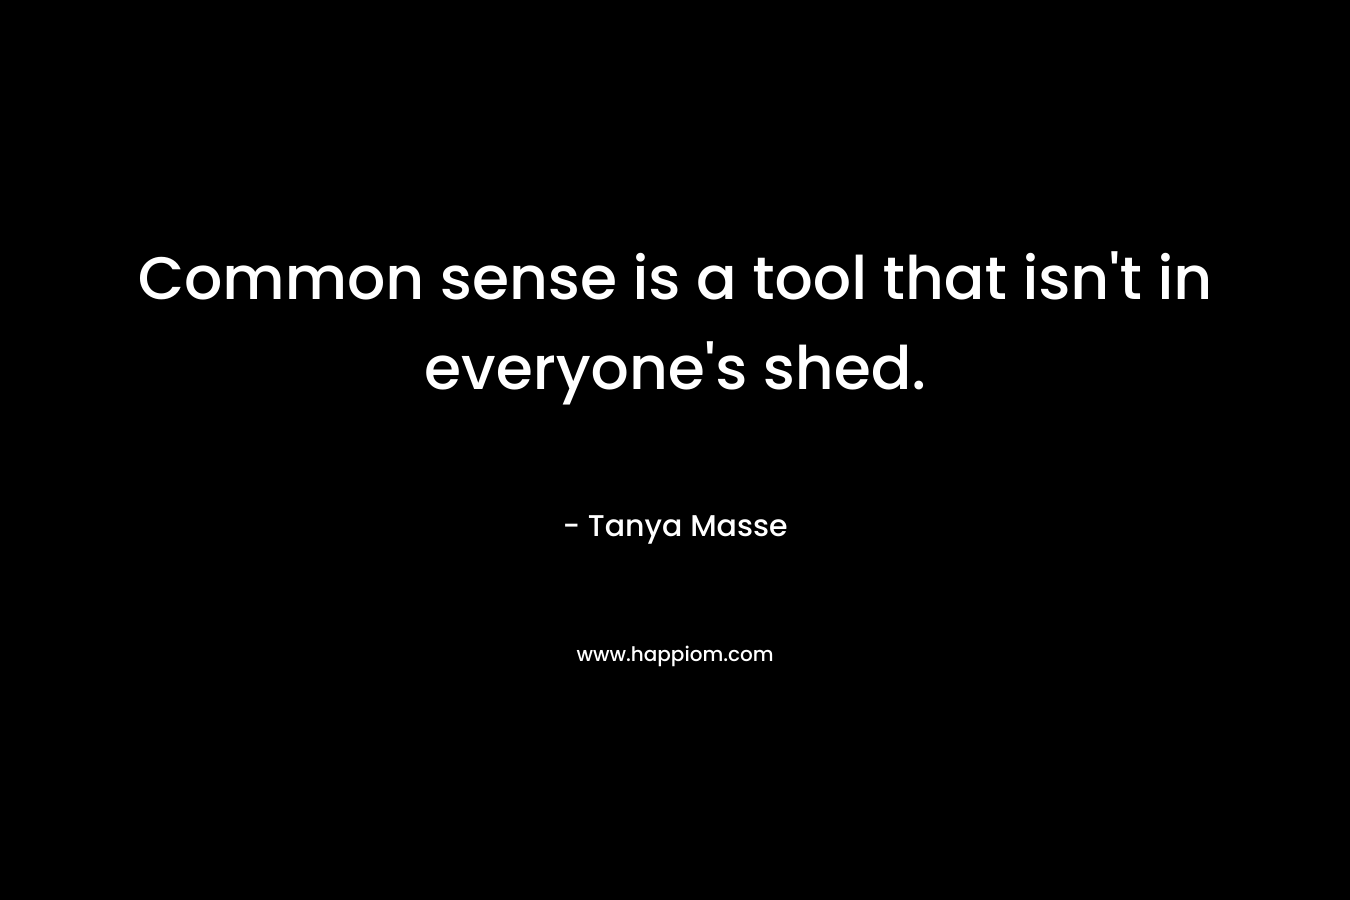 Common sense is a tool that isn't in everyone's shed.